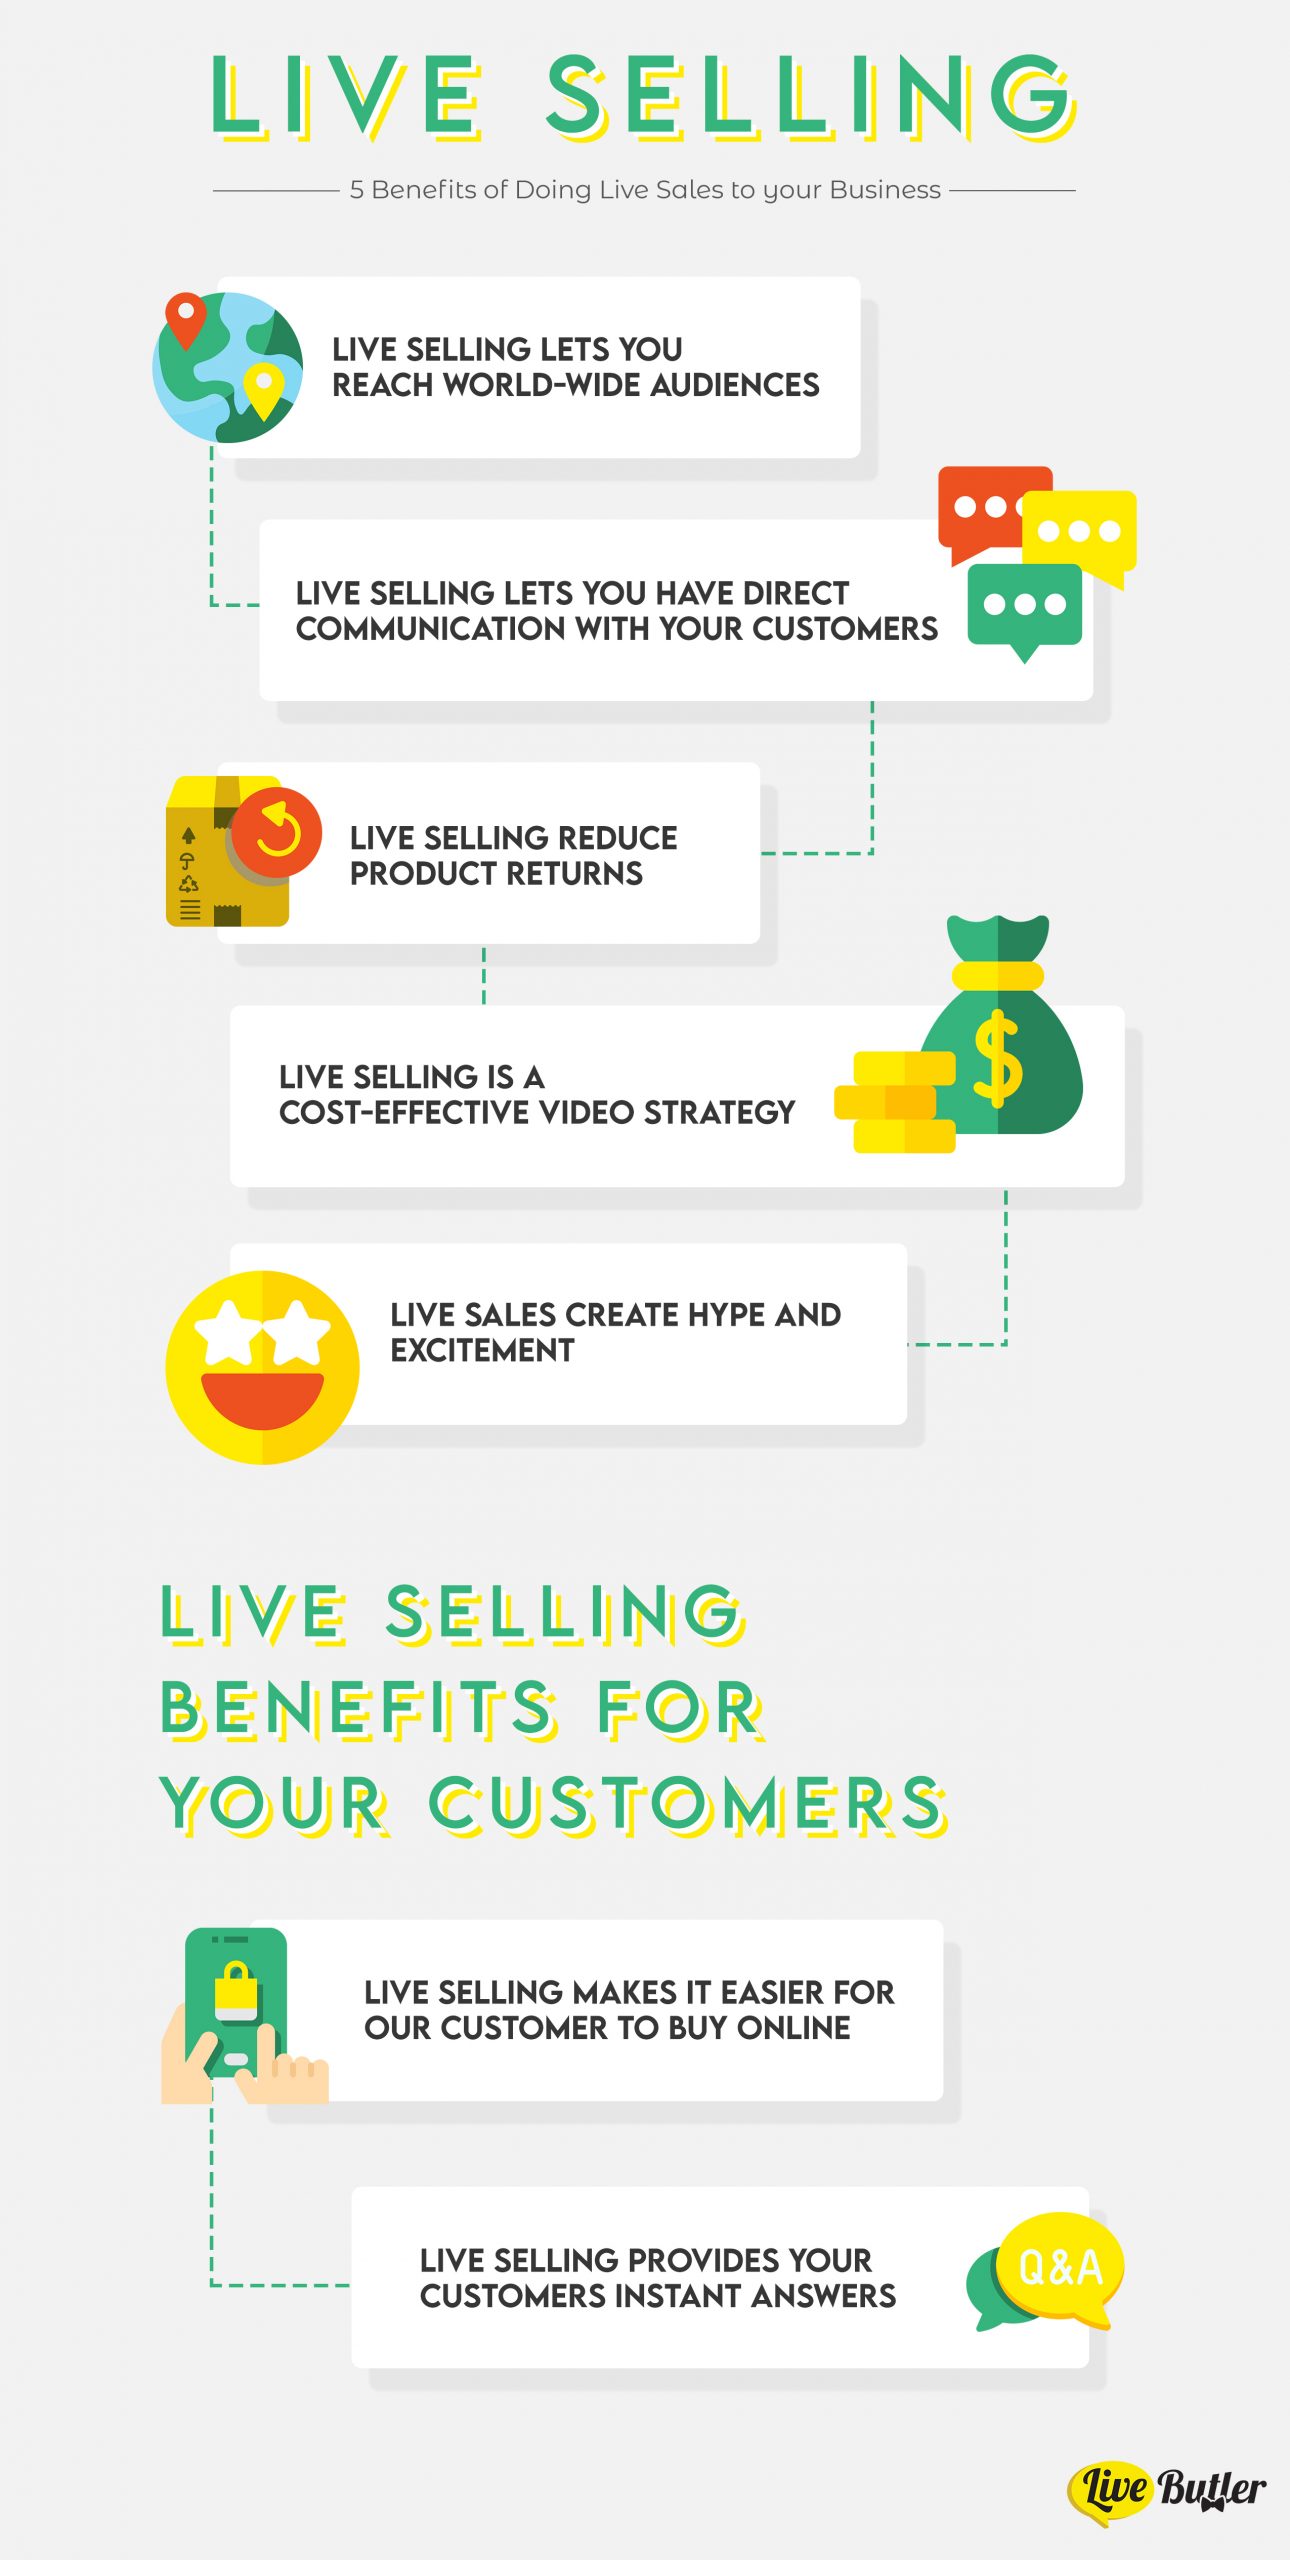 Benefits of live selling